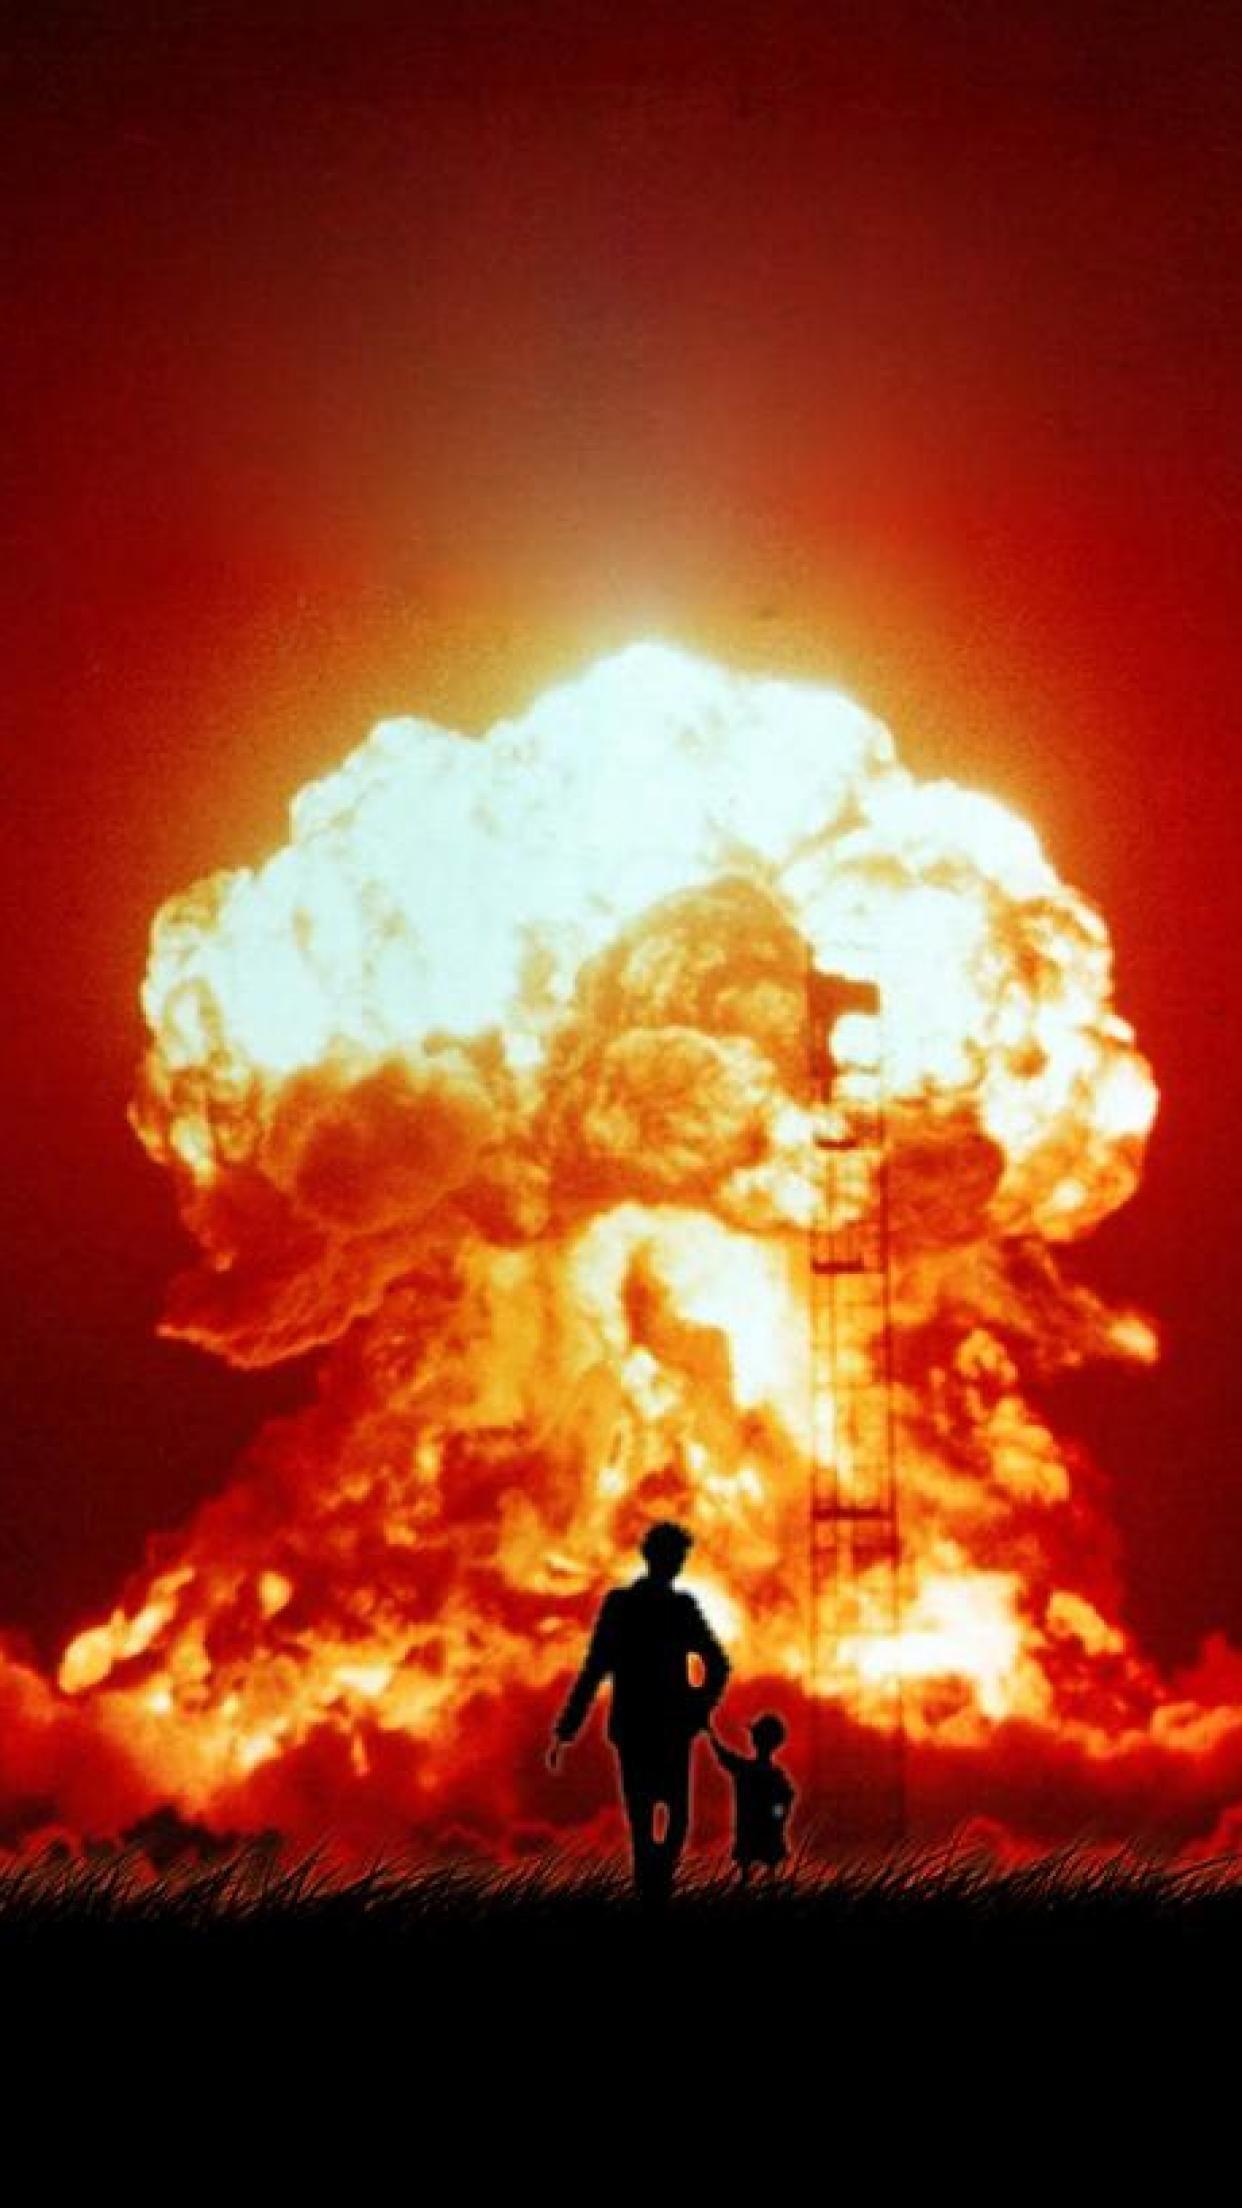 Nuclear explosion wallpaper xD Wallpaper. Nuclear